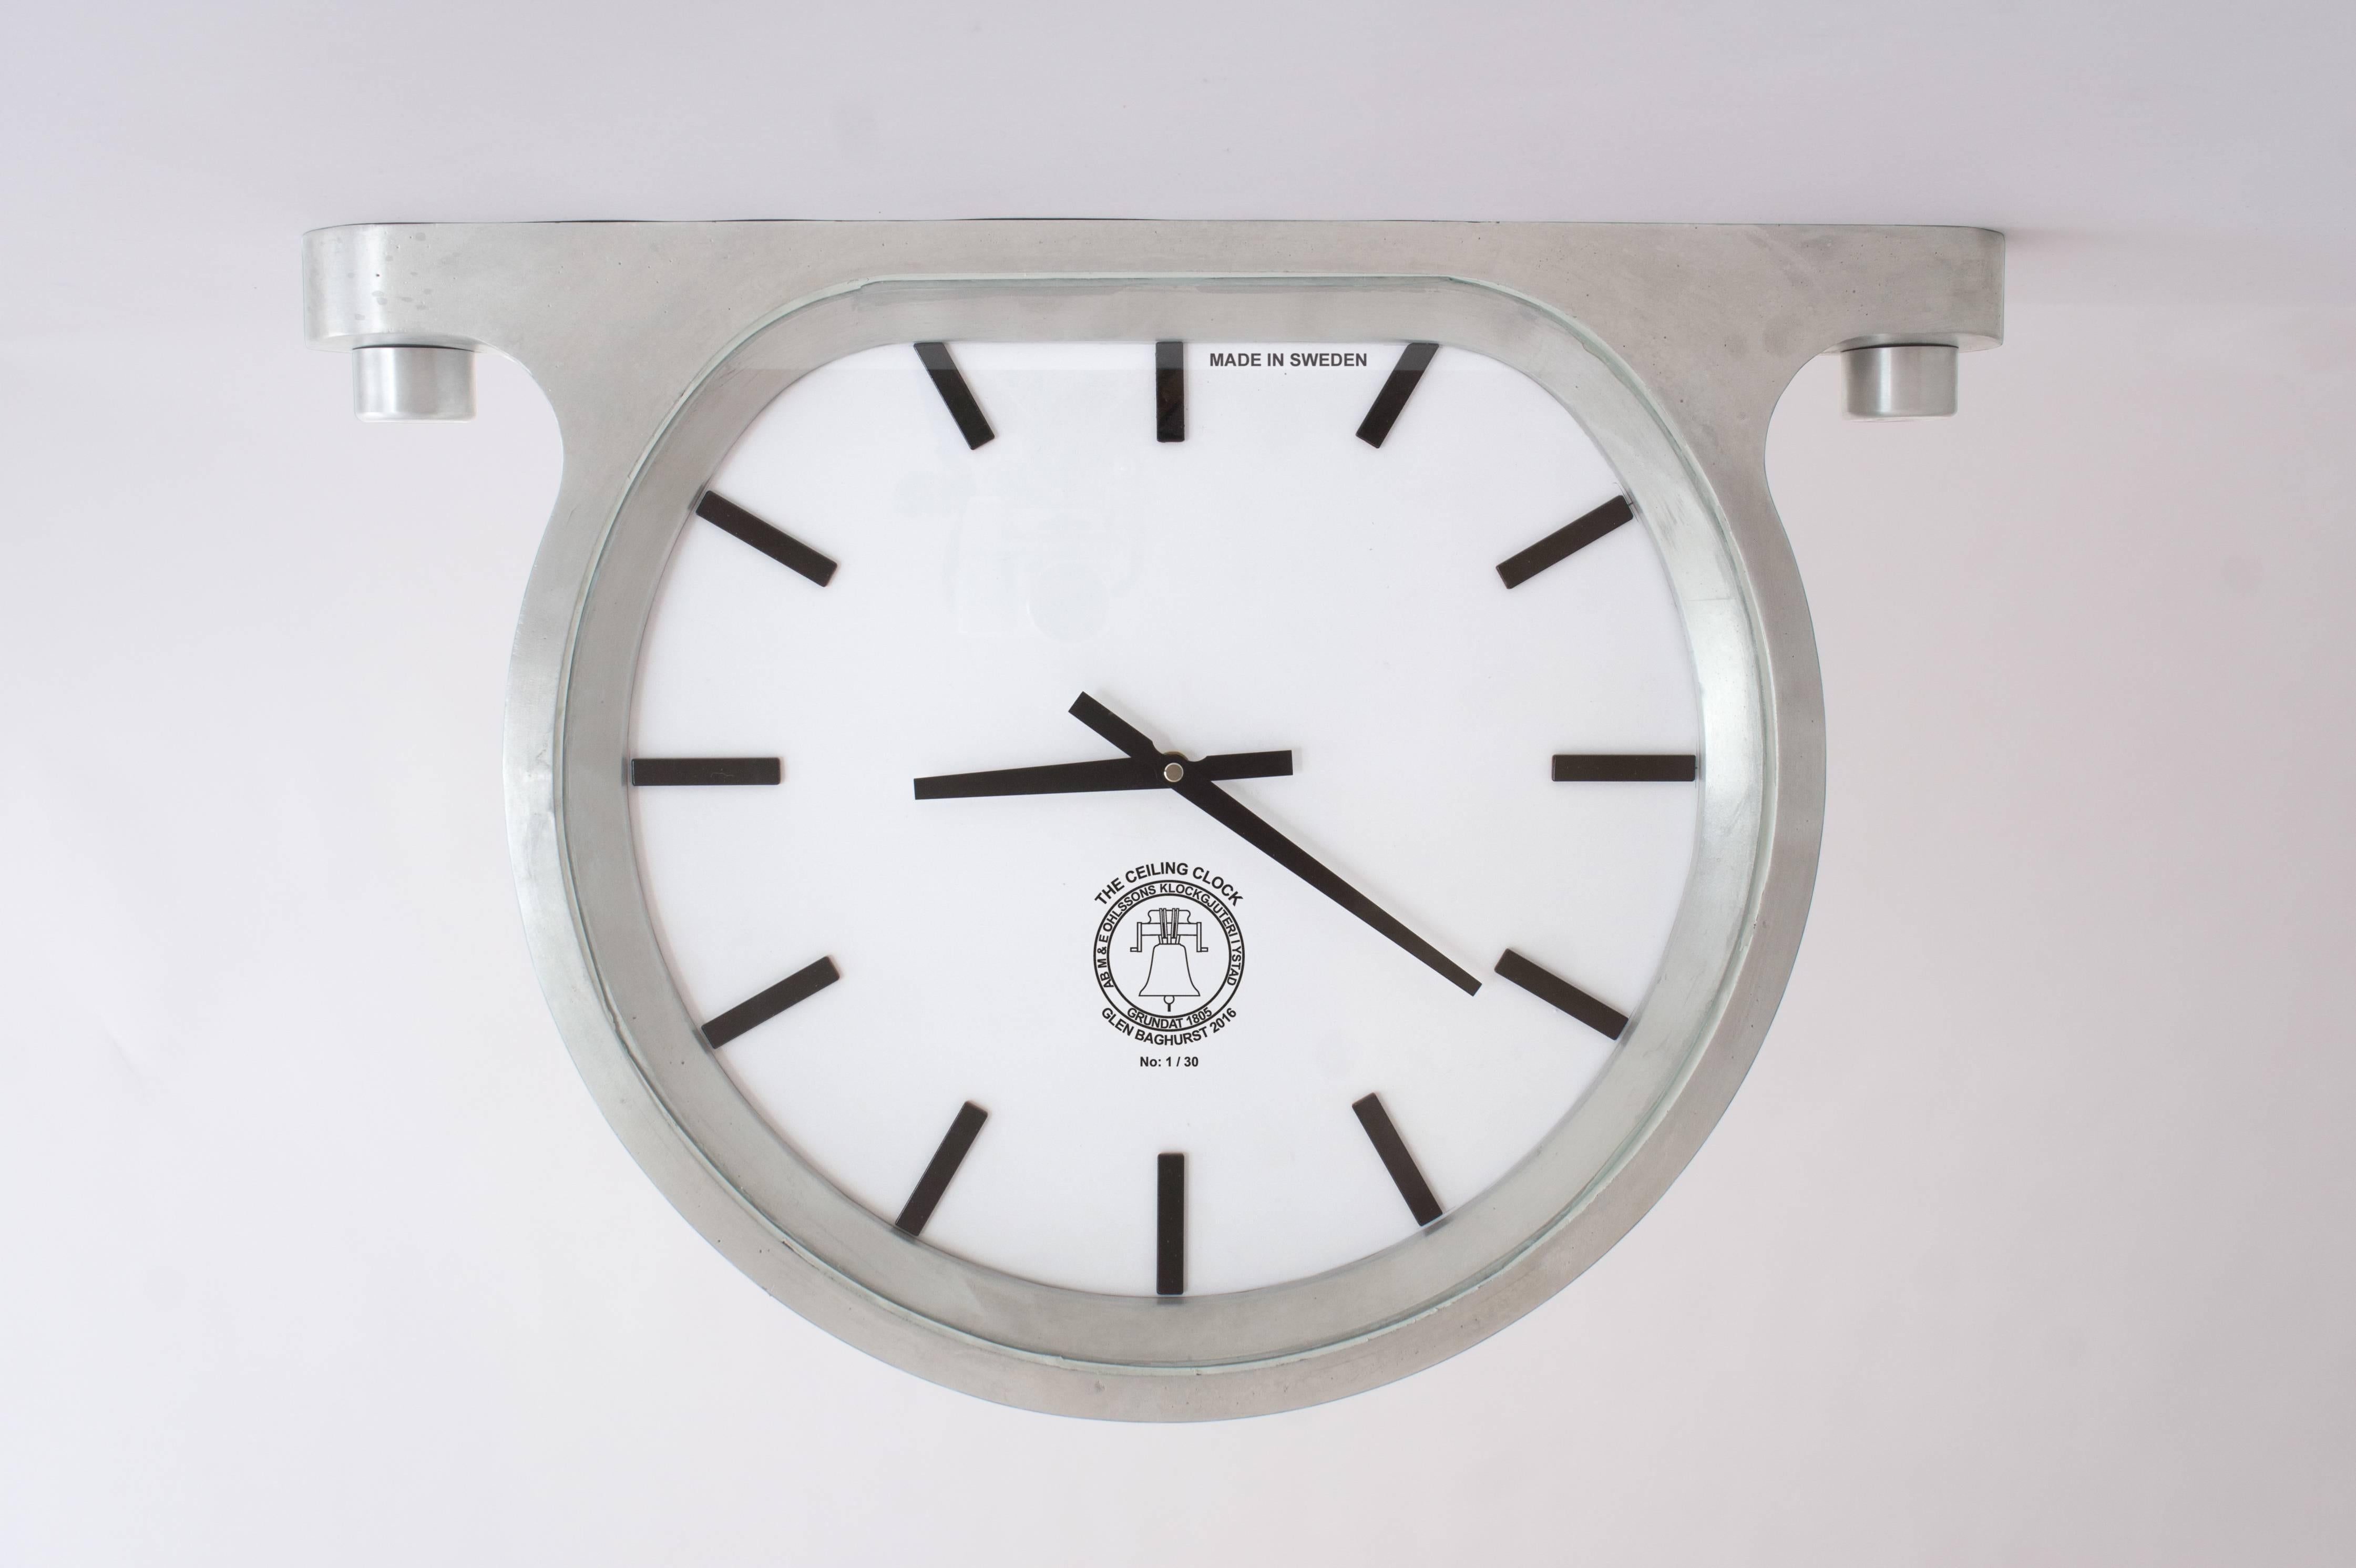 ‘The Ceiling Clock’ is a timepiece that can be attached to the wall, ceiling or sitting on a mantel. Pictured here with Portuguese Alpinina Limestone. 

Inspired by his father's wristwatch collection Glen Baghurst has designed the casing of the